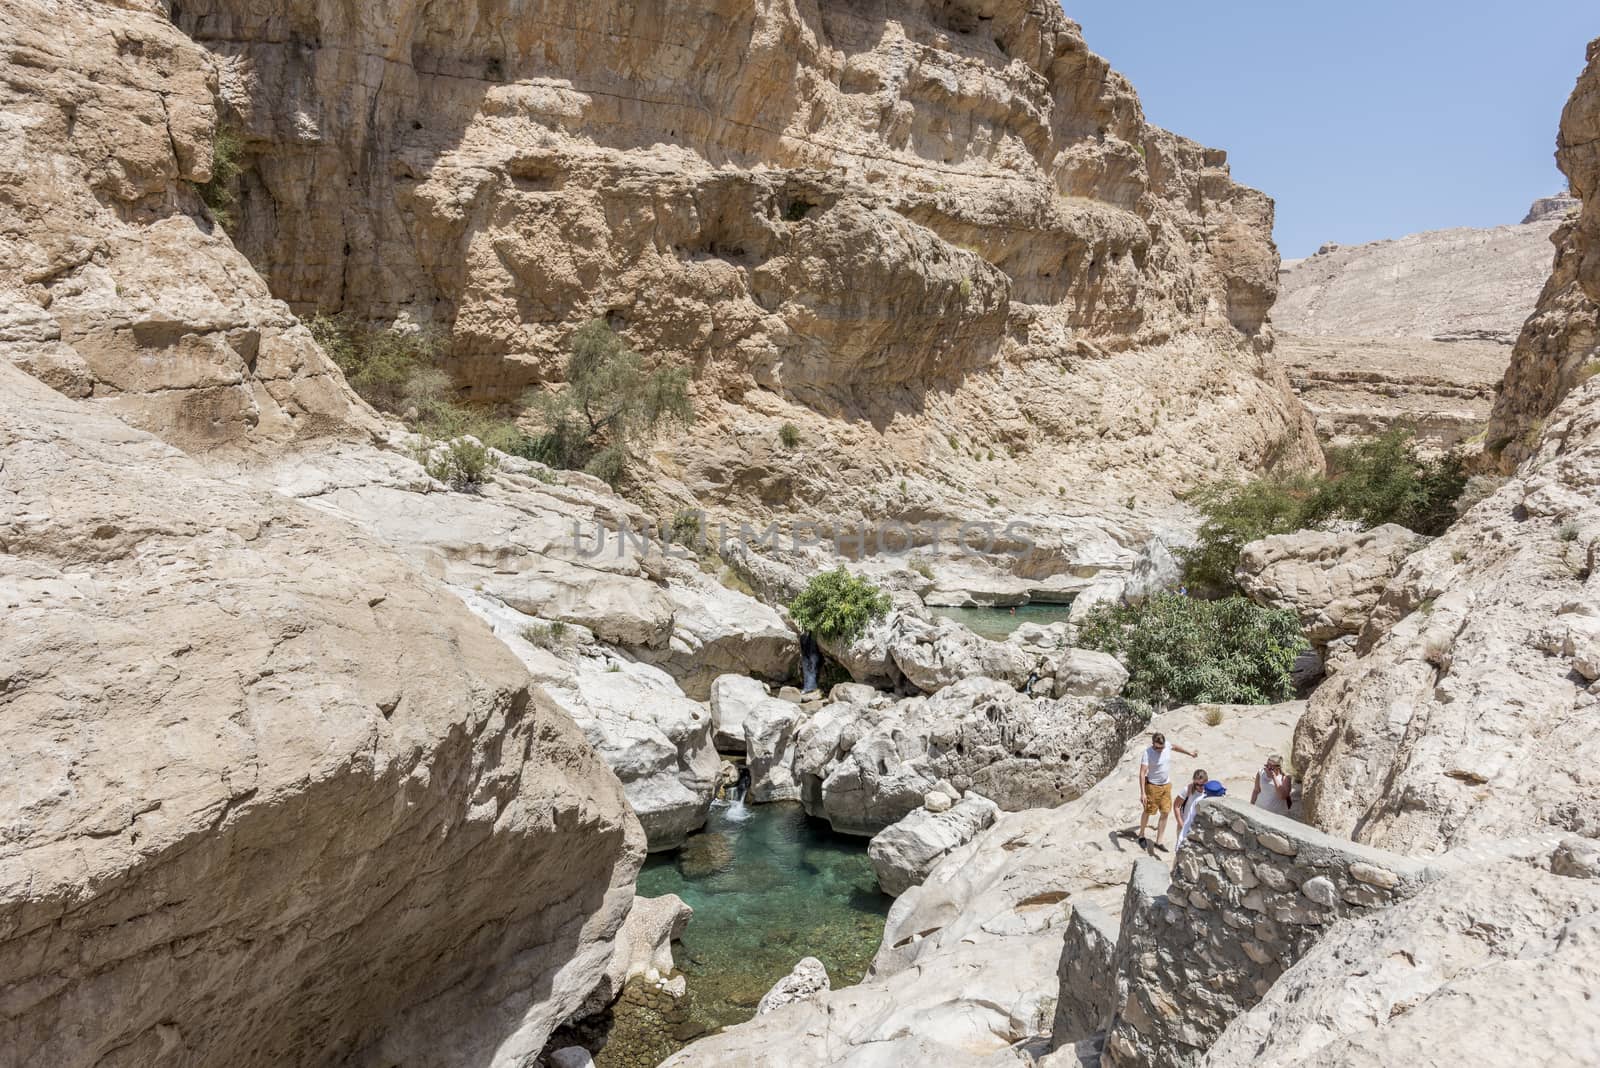 Tourists and guide trekking near the river and pool in the canyon of Wadi Bani Khalid,  in Oman